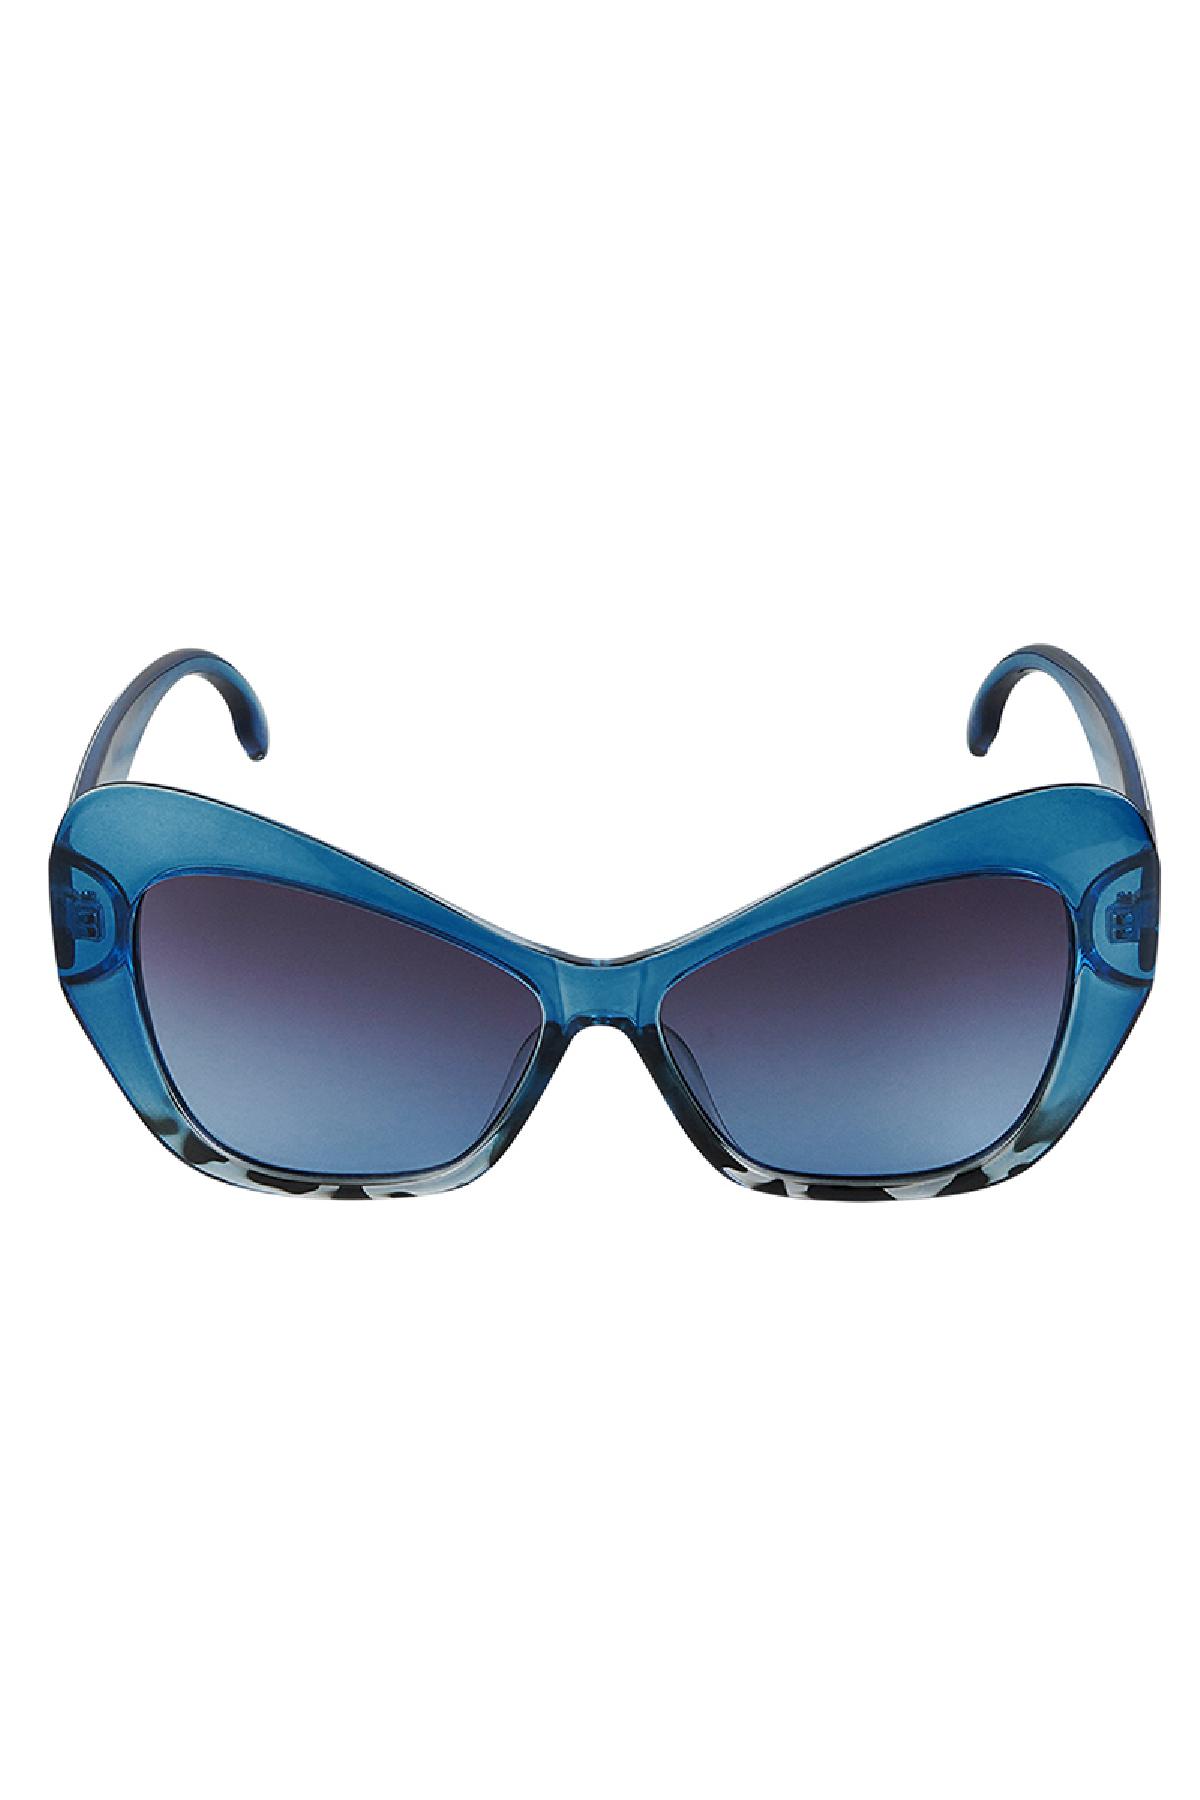 Sunglasses statement Blue PC One size h5 Picture3